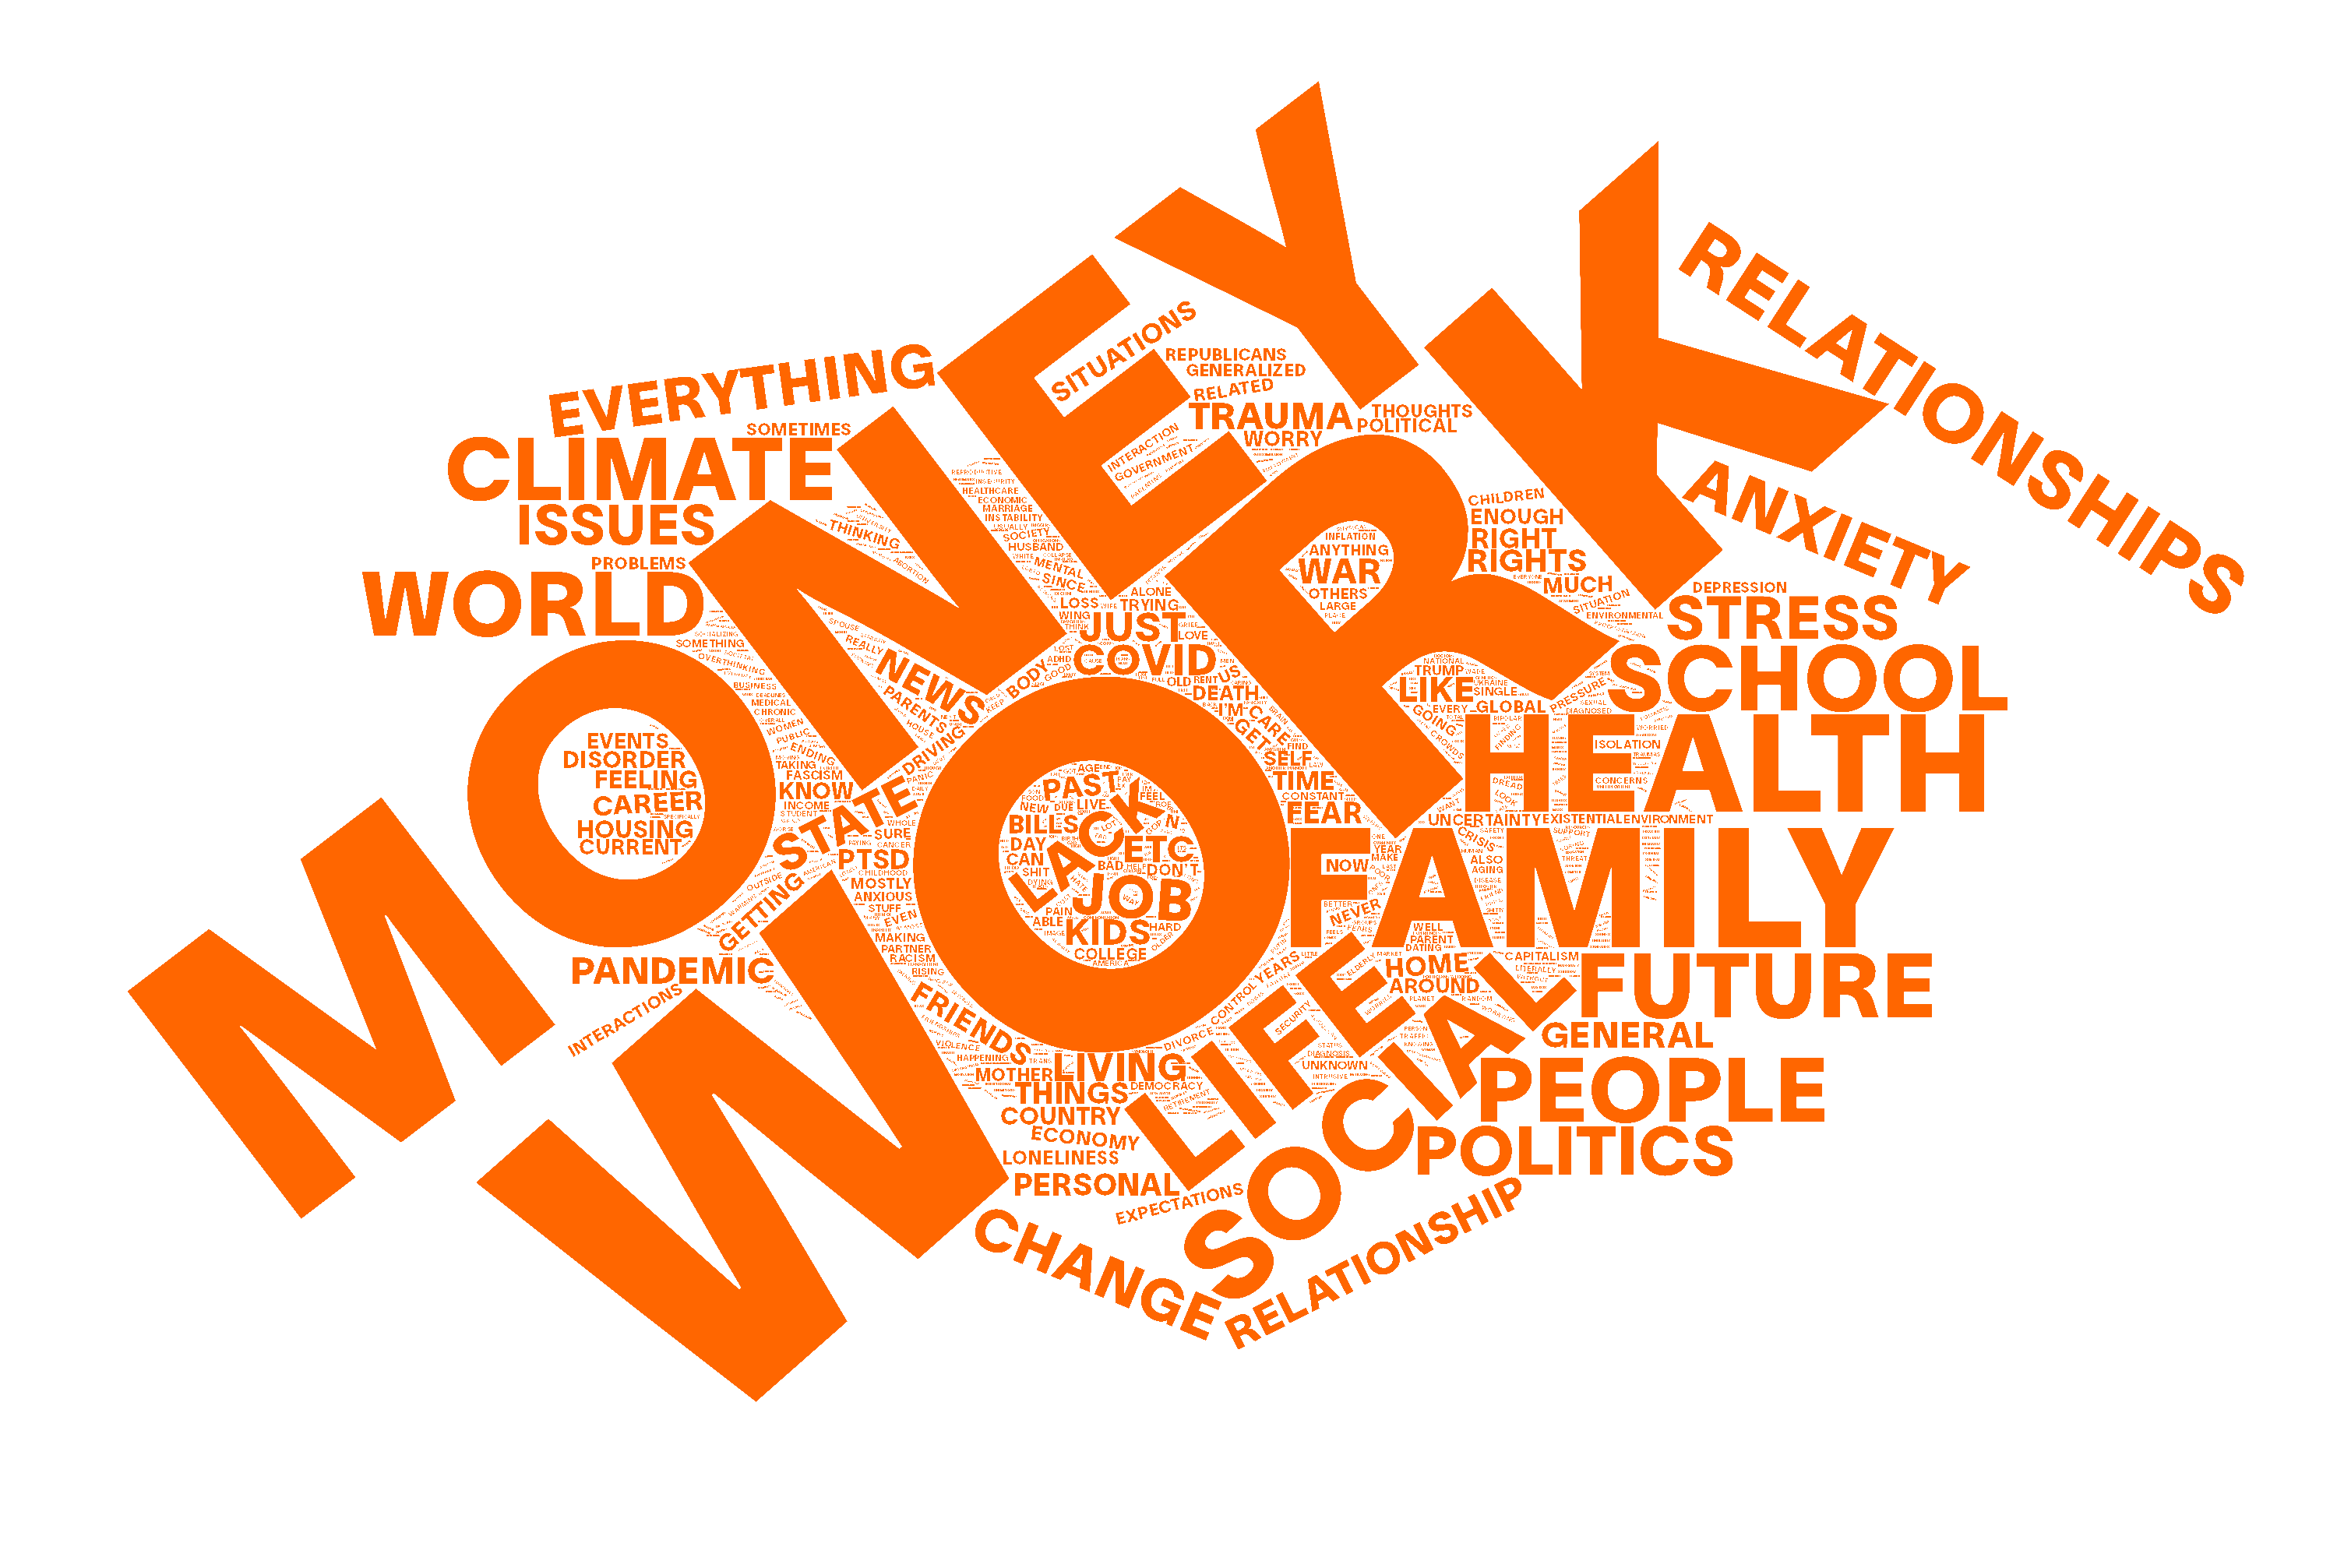 An orange word cloud with words like money, work, everything, climate, health, family, life, social, future, politics, people, relationships, trauma, change